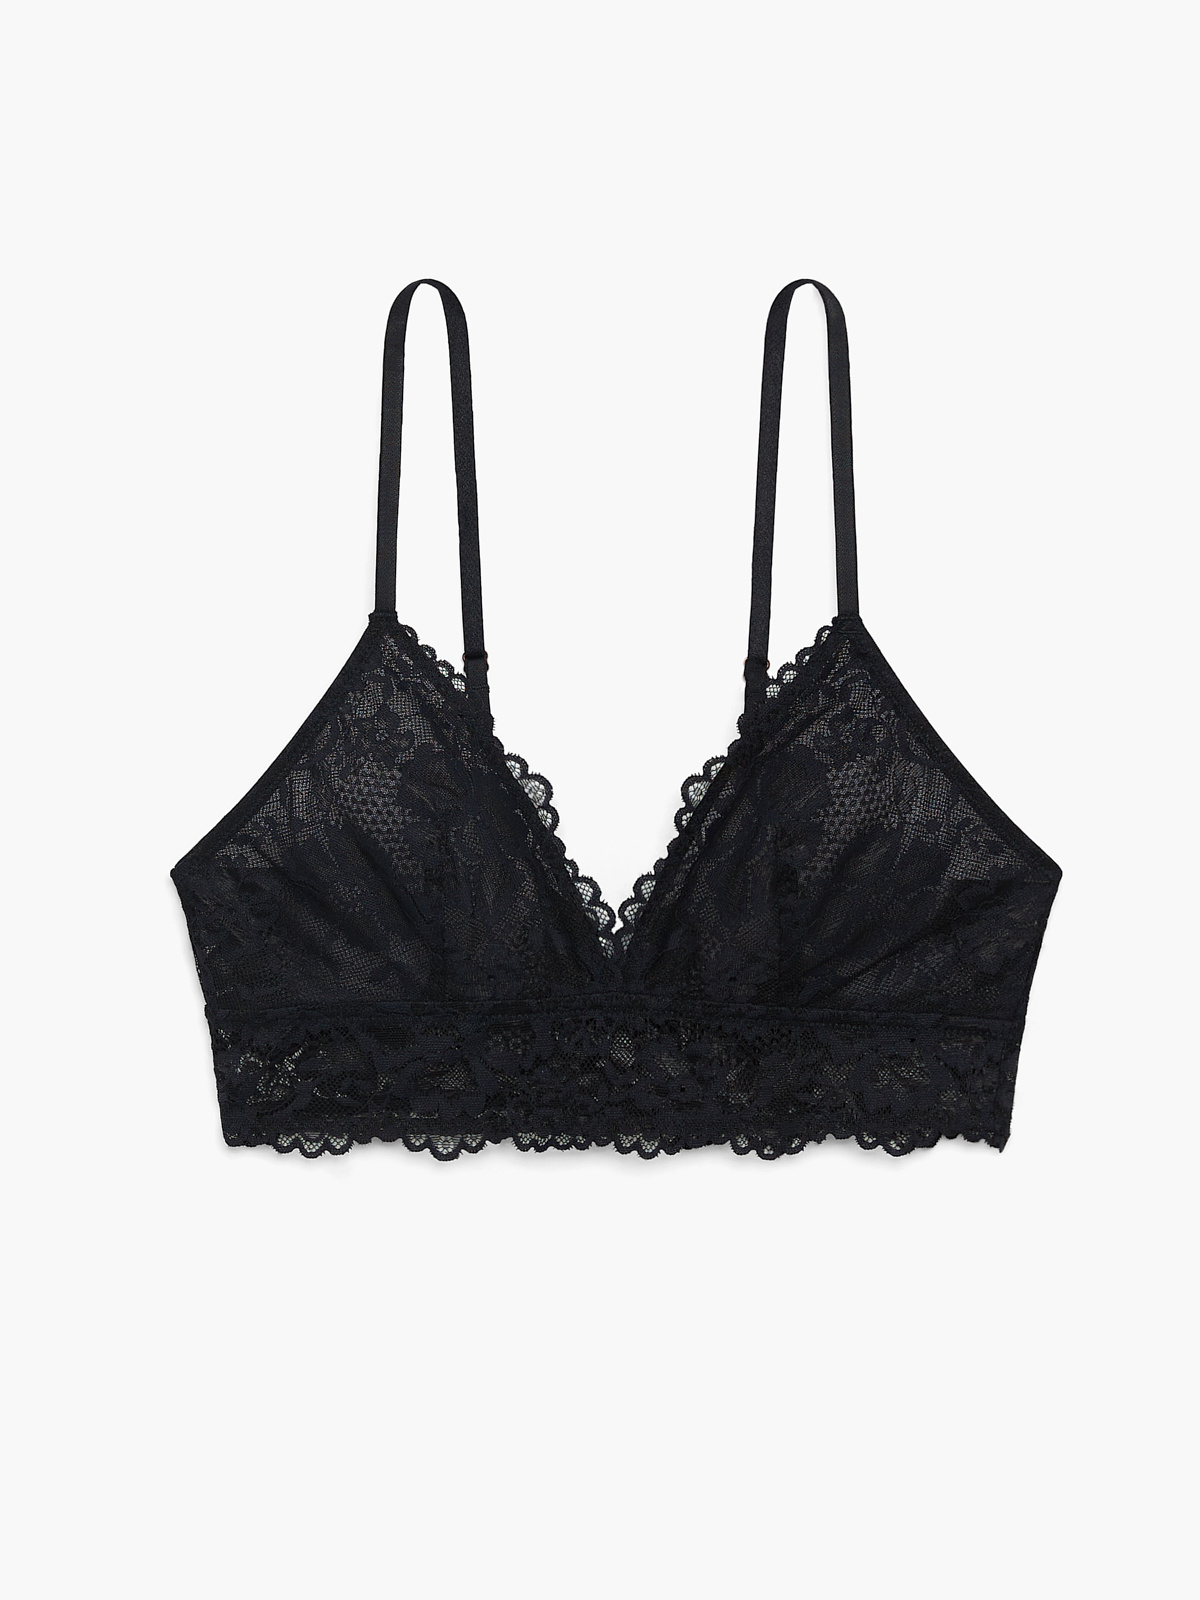 Floral Lace Triangle Bralette in Black | SAVAGE X FENTY Netherlands